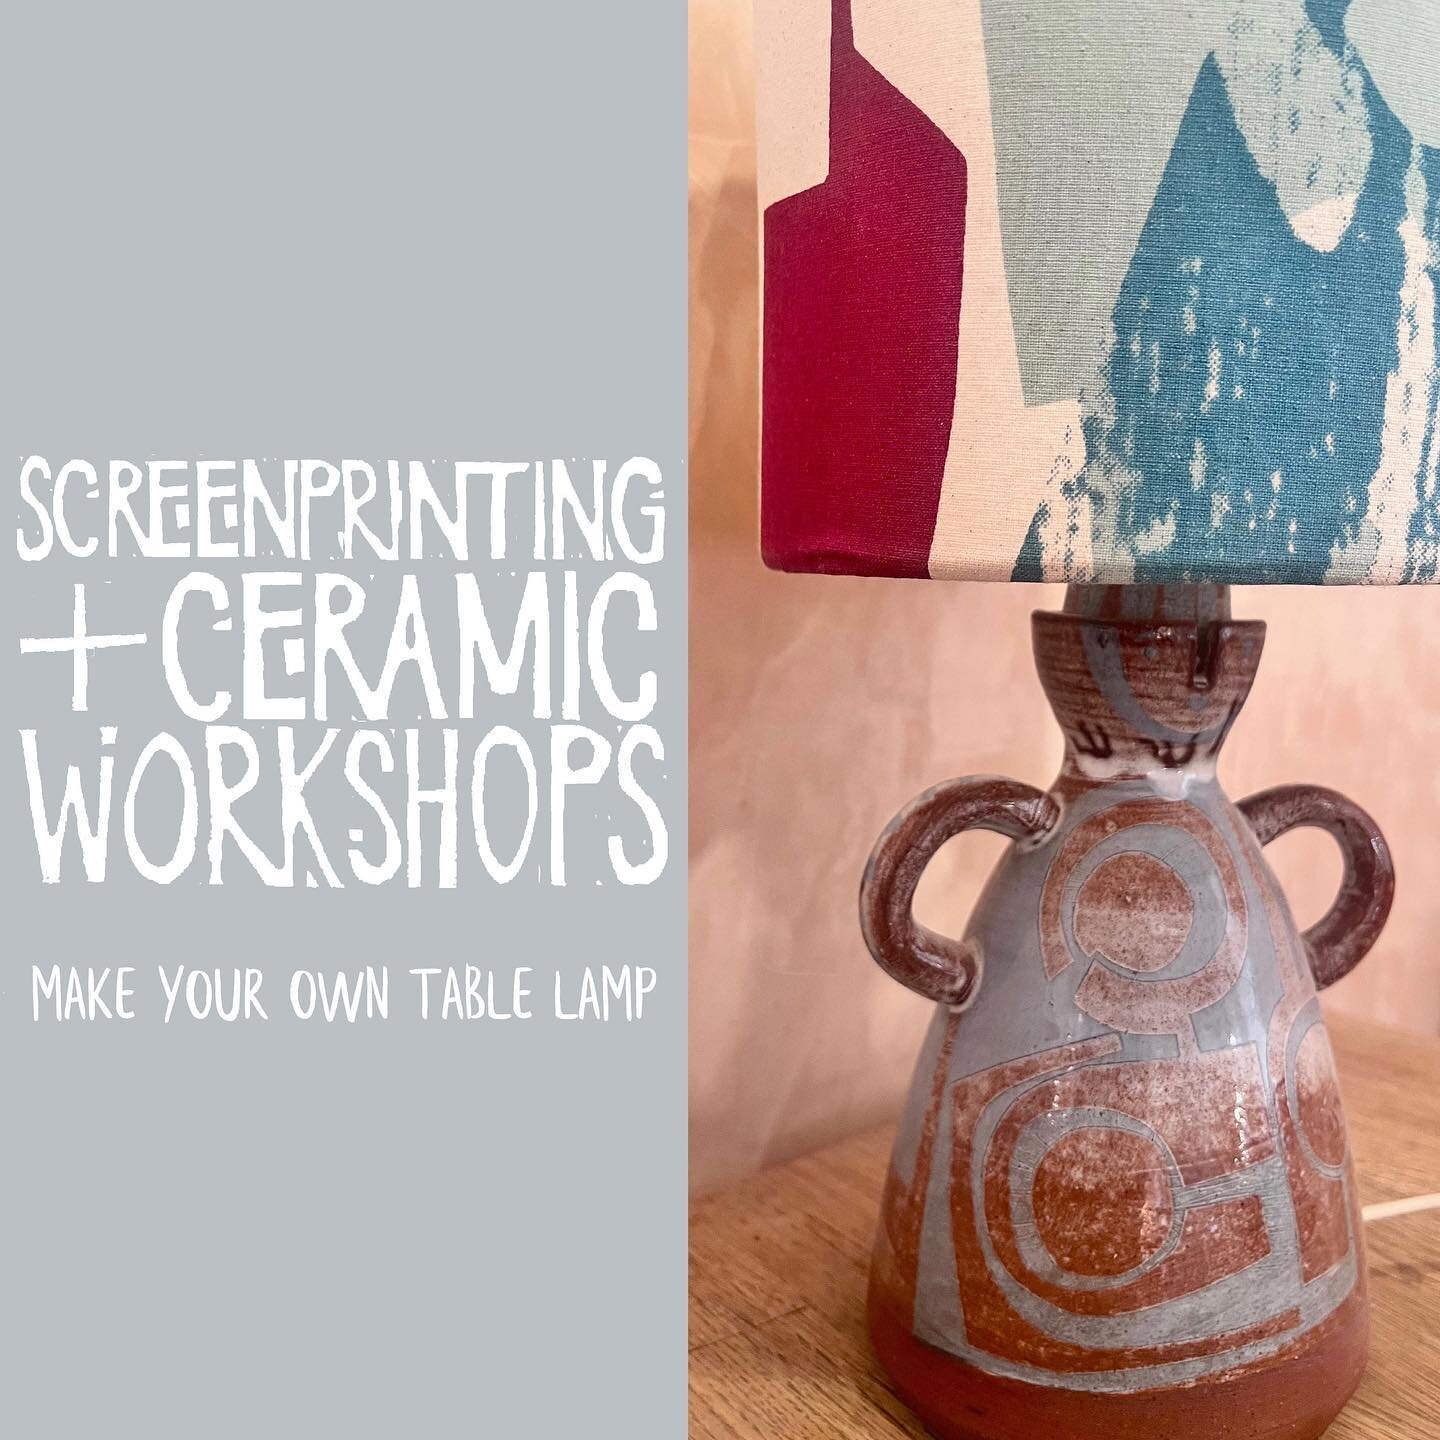 We are running another table lamp making workshop block. Come and join @evecampbelltextiles and @dreyworkshop for a 6 week block of ceramic and screenprinting workshops. Throughout the workshops you will make your own ceramic lamp stand and also a sc